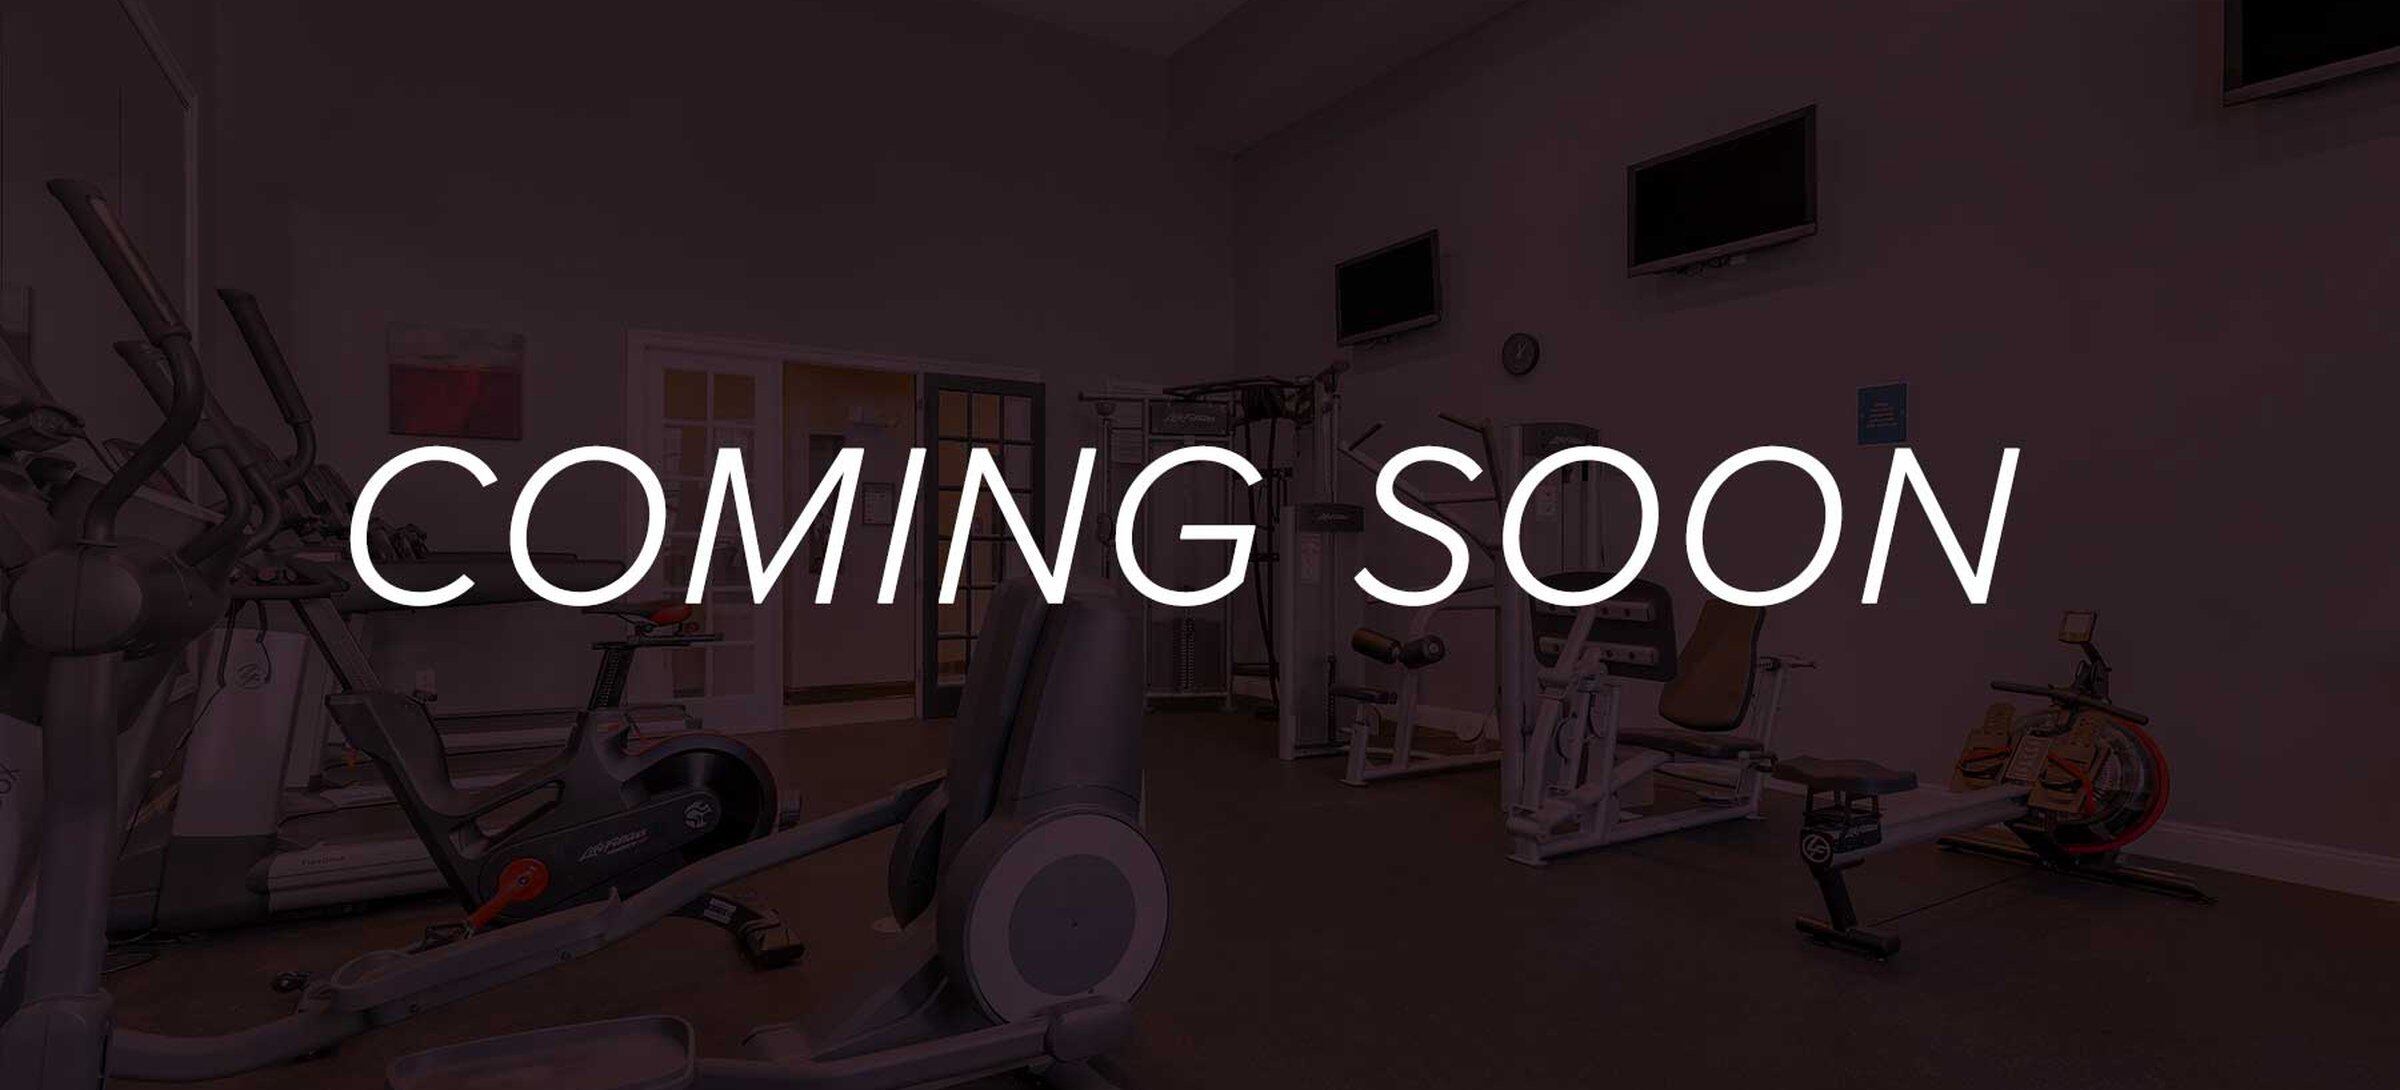 Coming soon - Renovated fitness center with updated cardio equipment